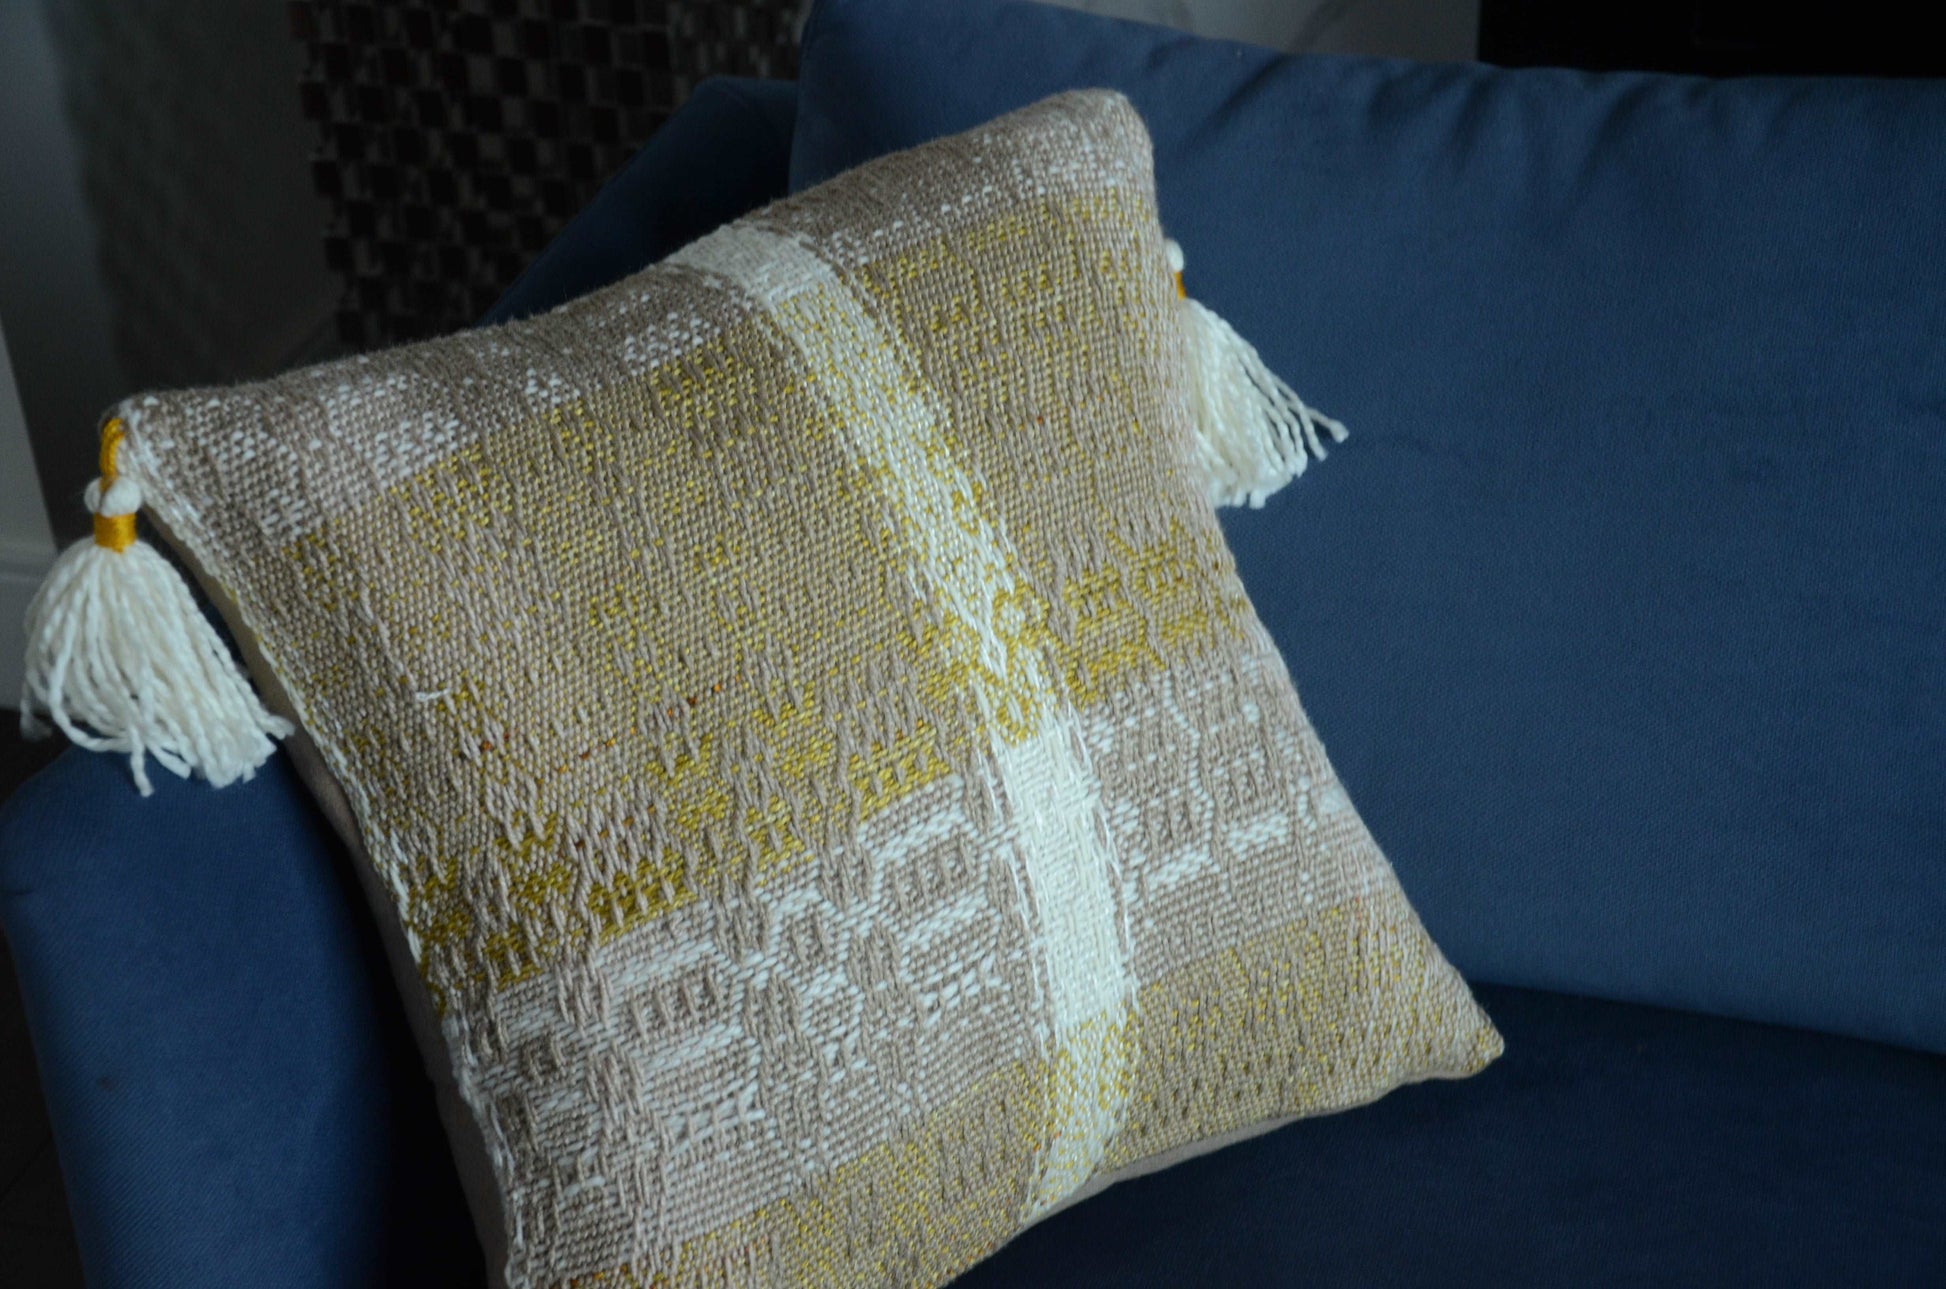 Neutral cream colored throw pillow cover on couch with tassels and golden yellow weaving detail